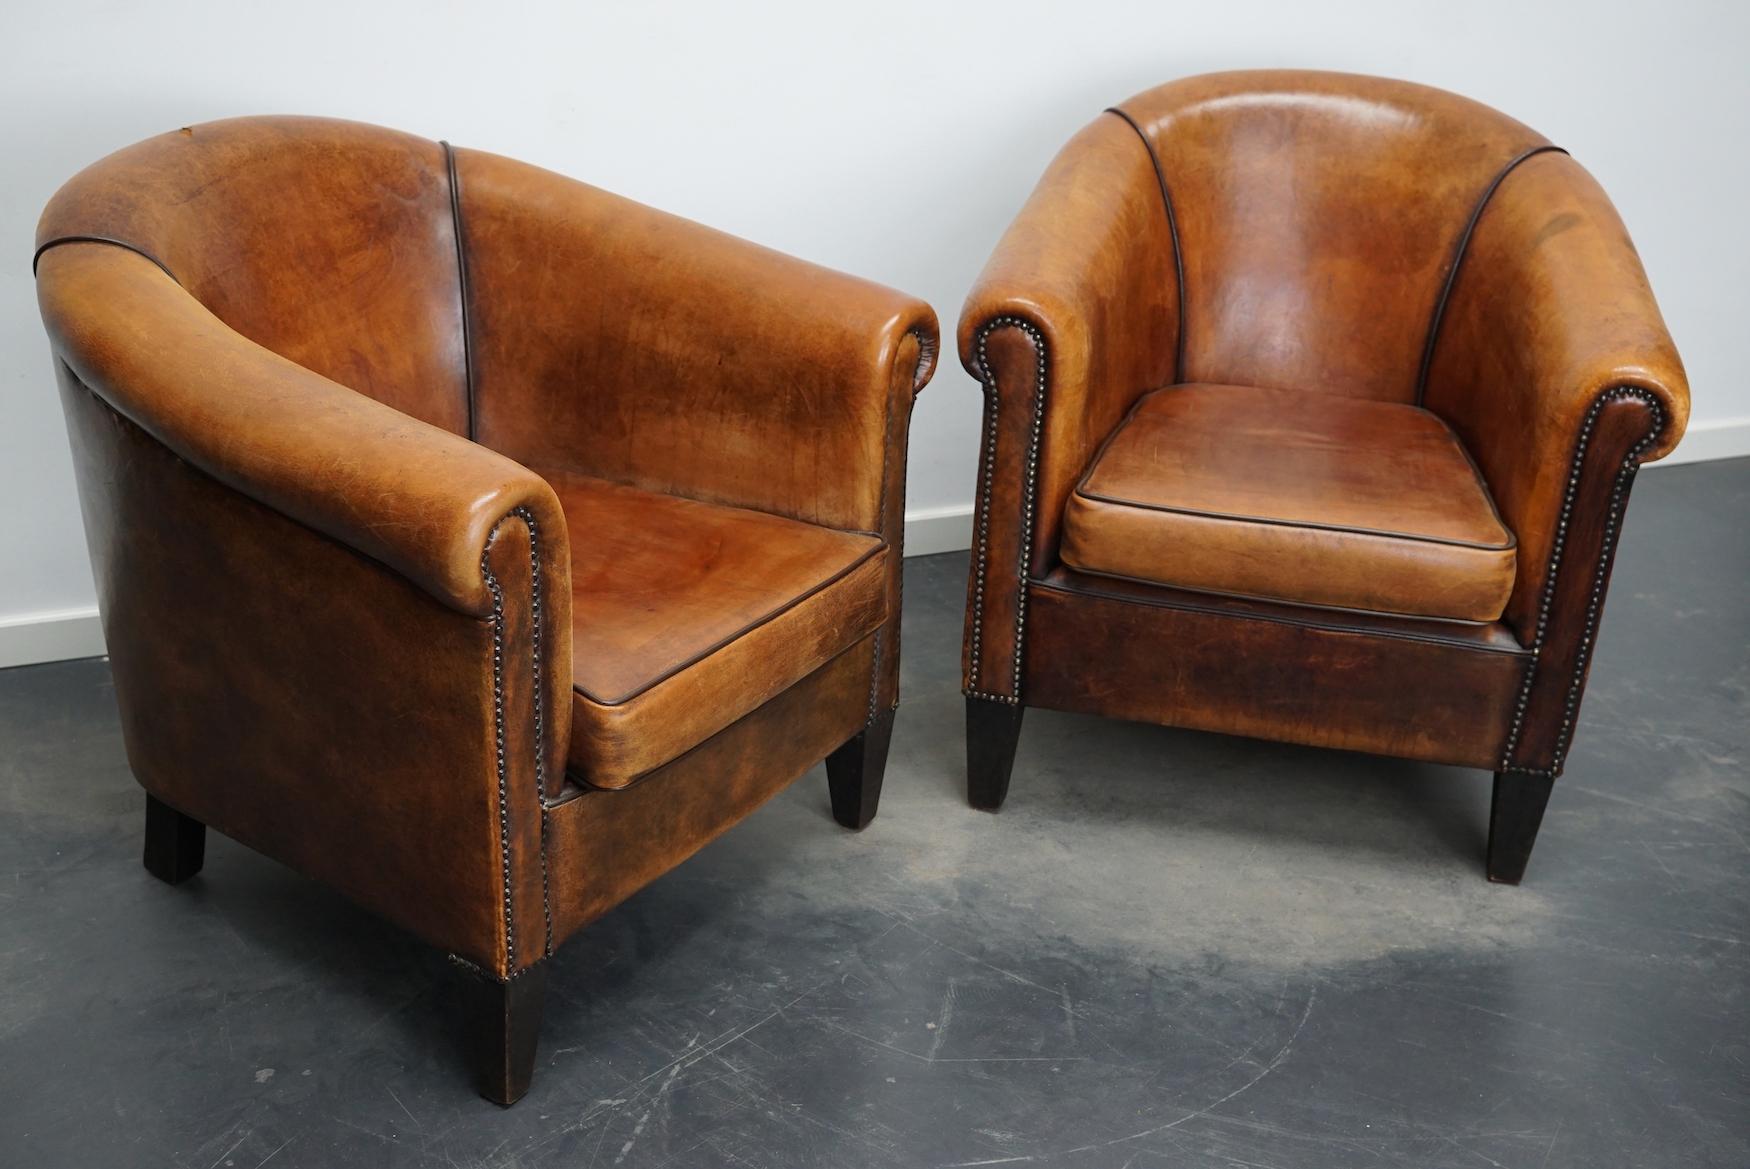 Industrial Vintage Dutch Cognac Leather Club Chairs, Set of 2